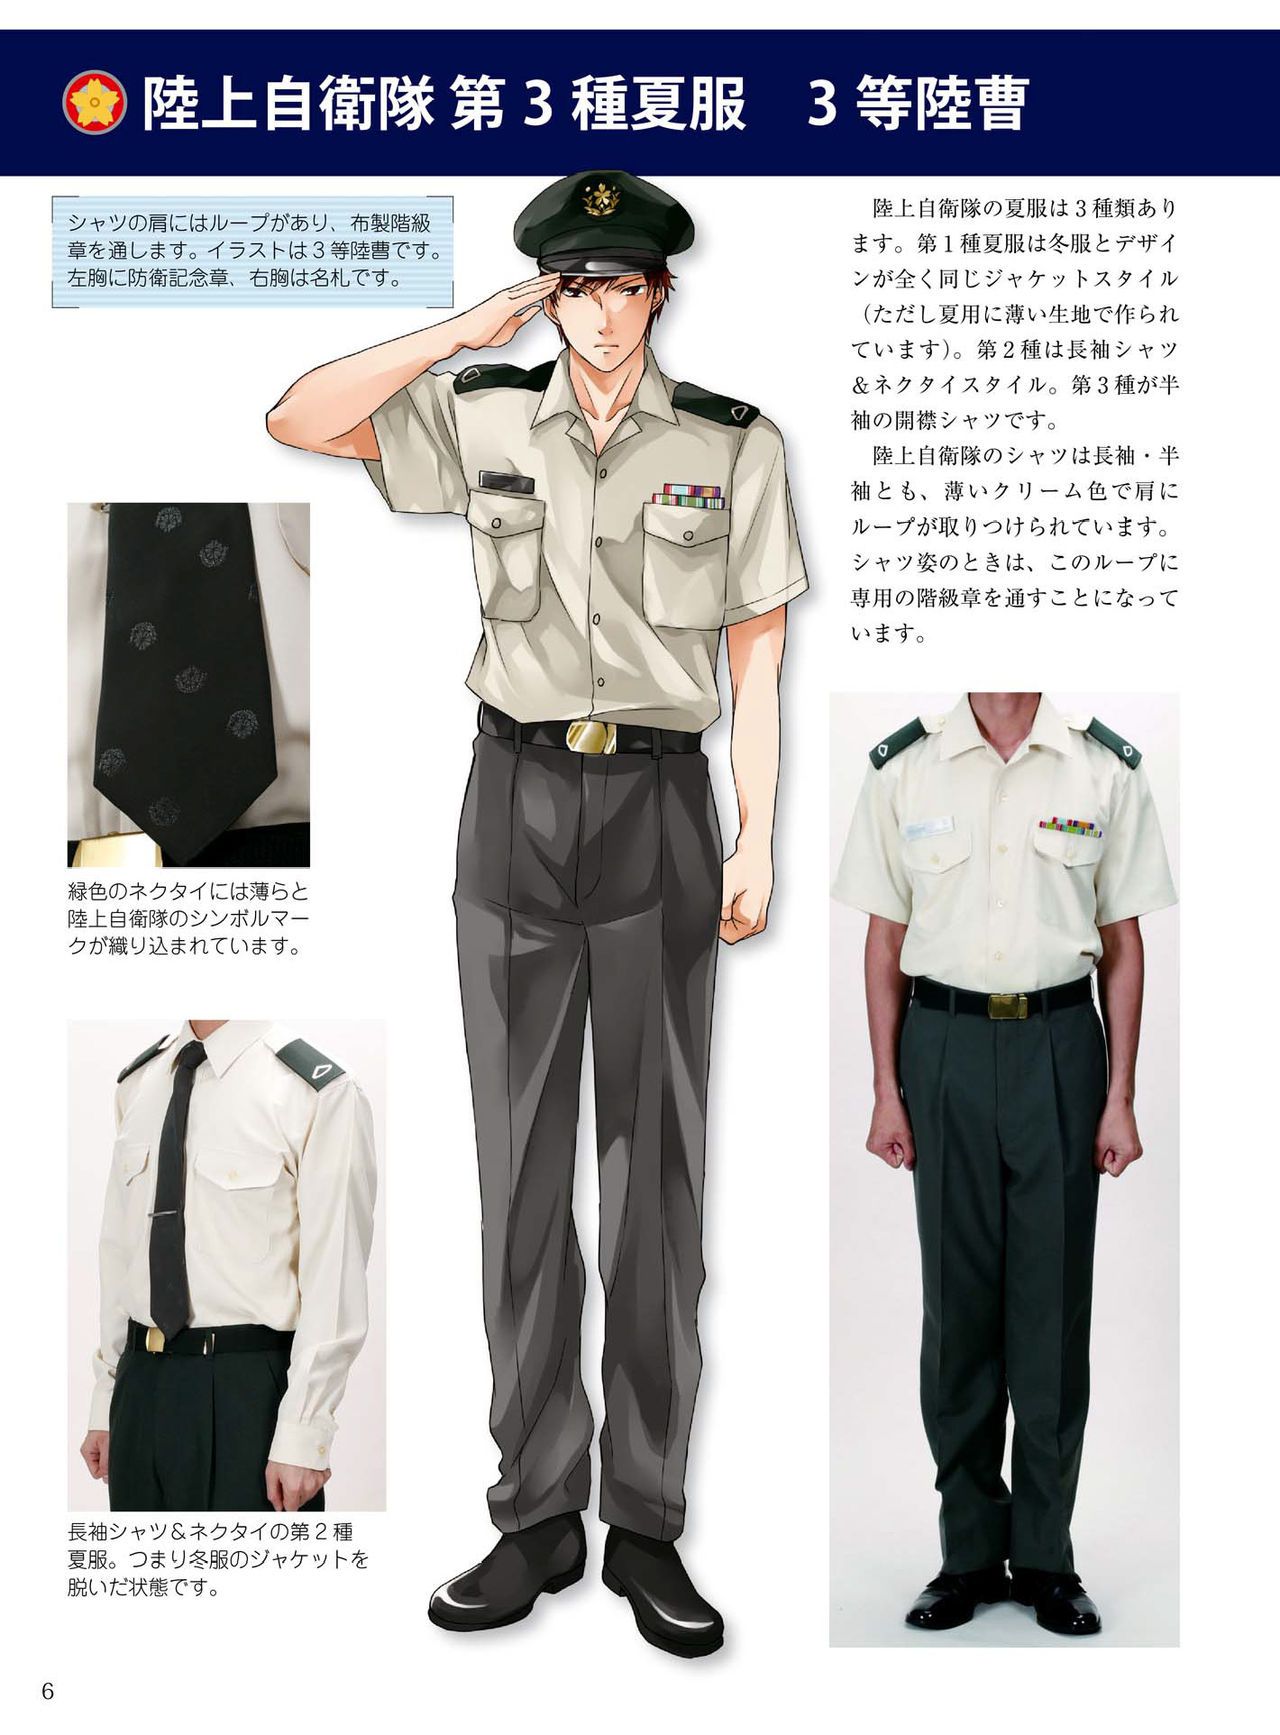 How to draw military uniforms and uniforms From Self-Defense Forces 軍服・制服の描き方 アメリカ軍・自衛隊の制服から戦闘服まで 9